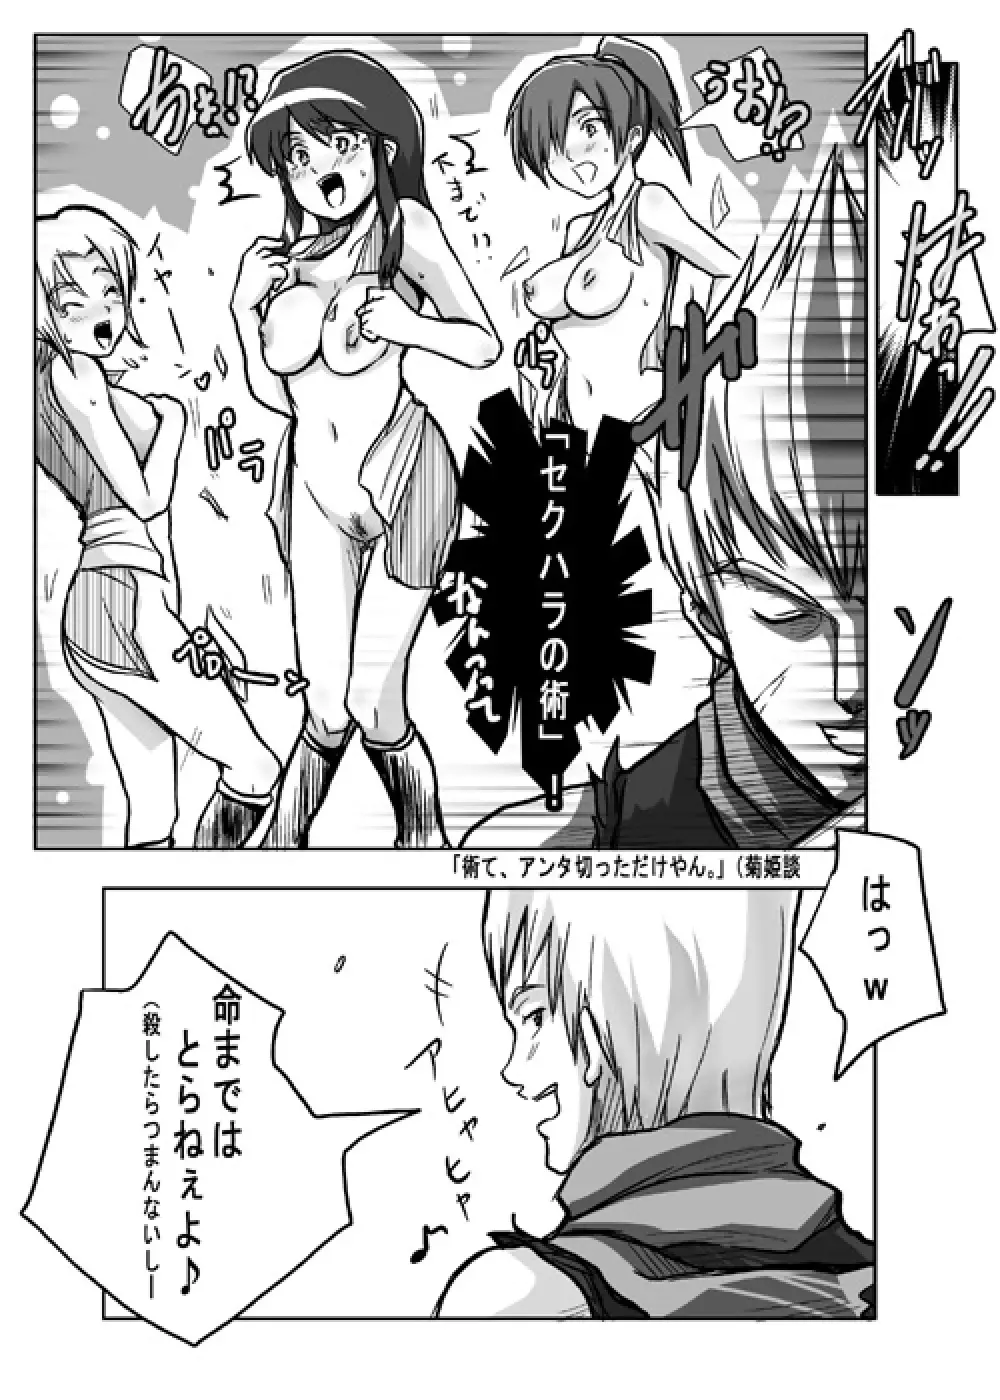 Same-themed manga about kid fighting female ninjas from japanese imageboard. Page.53